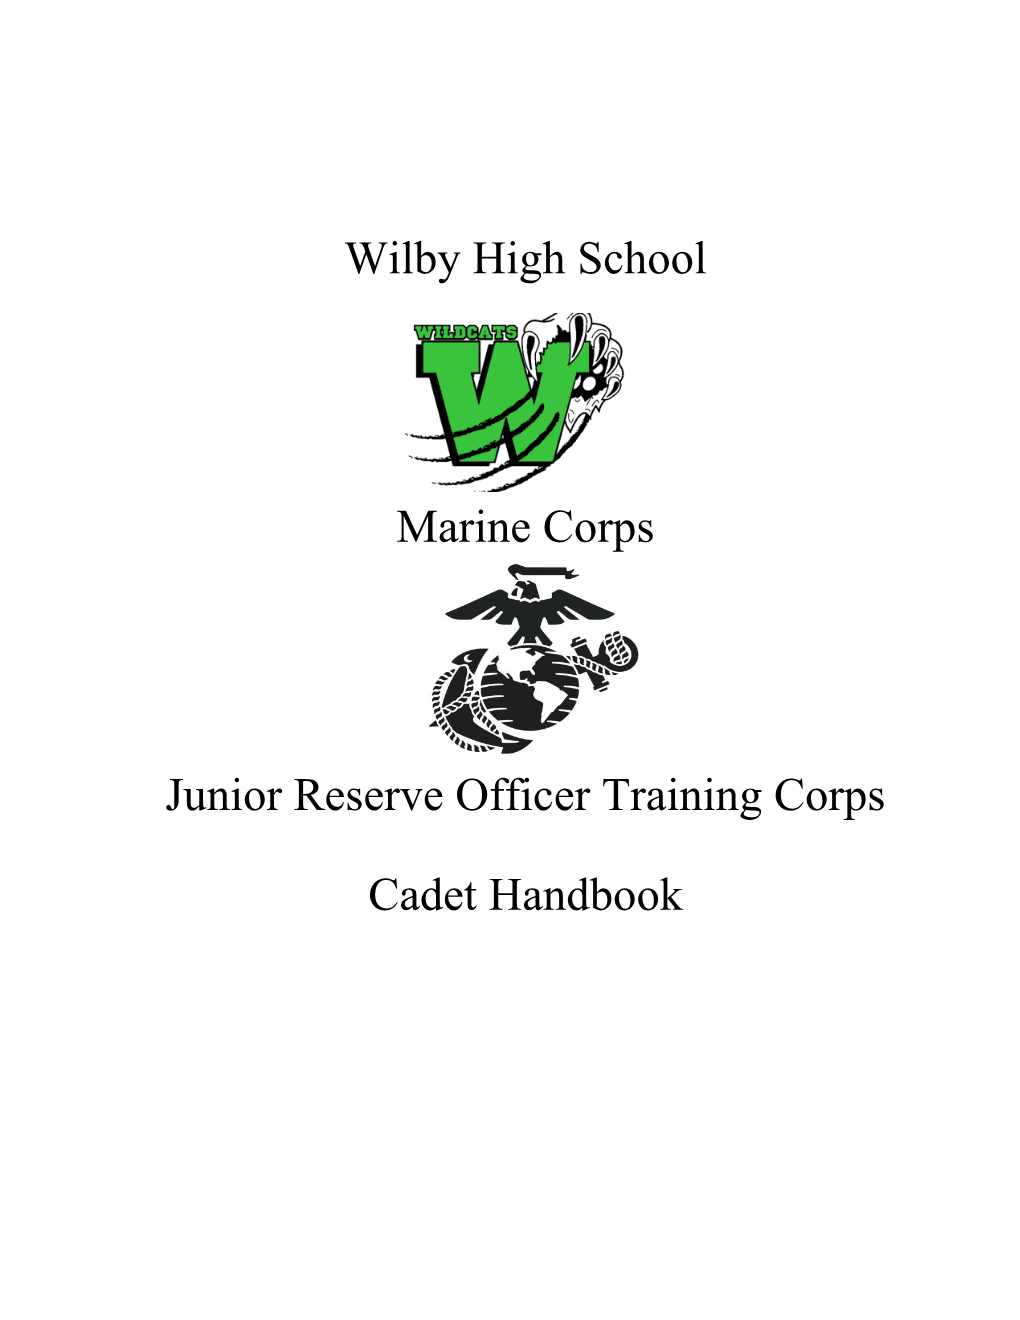 Wilby High School Marine Corps Junior Reserve Officer Training Corps!